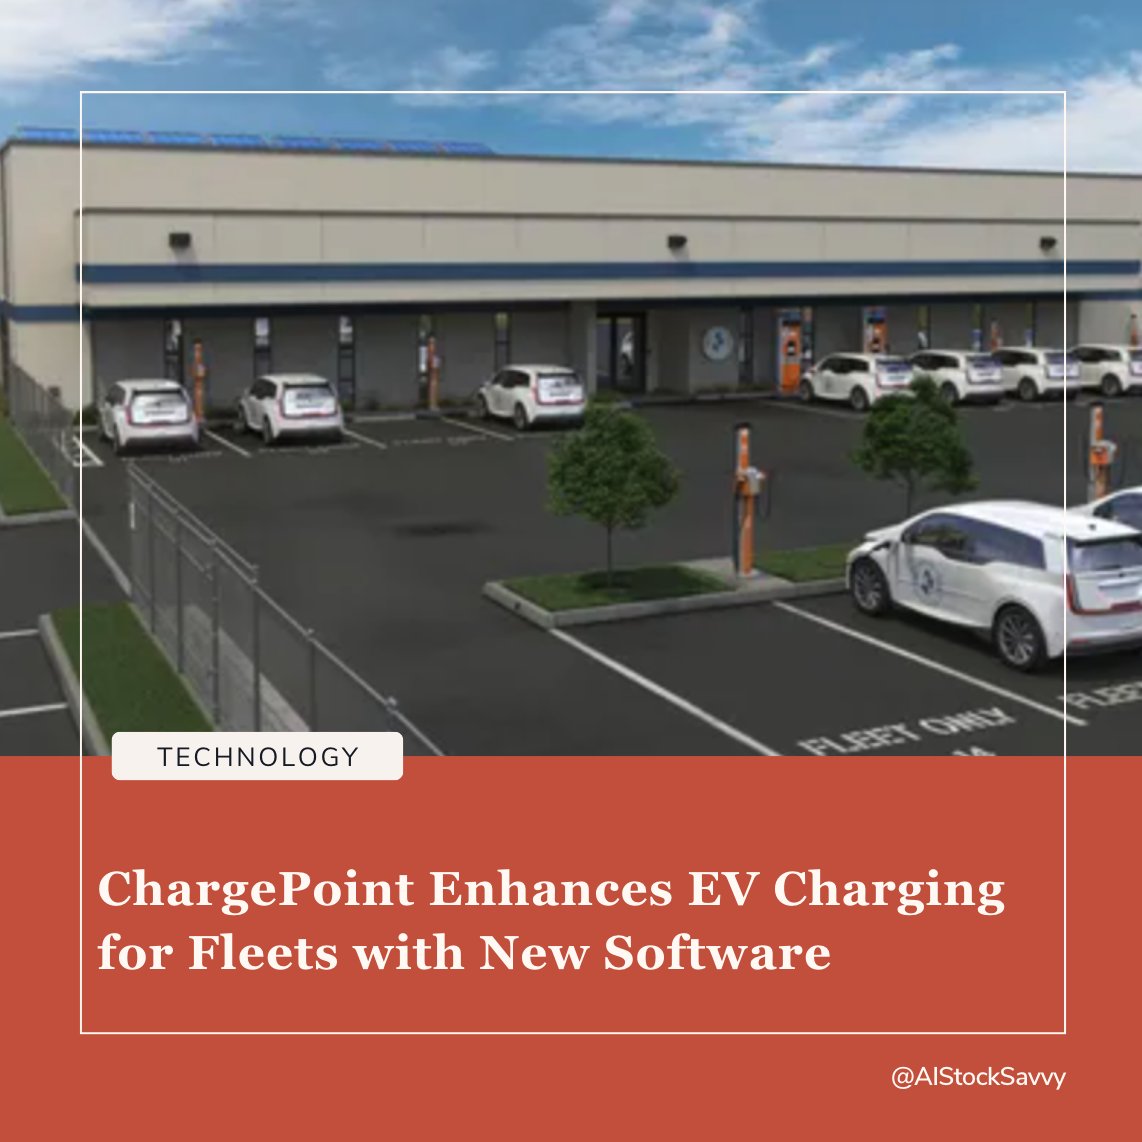 📣 JUST IN: $CHPT ChargePoint Unveils New EV Charging Solutions for Fleets $TSLA $BLNK $EVGO

👉 Key Highlights:

📍 ChargePoint announces integrated charging software for electric fleets.

📍 Software allows drivers to find, use, and pay for charging via one app.

📍 Includes…